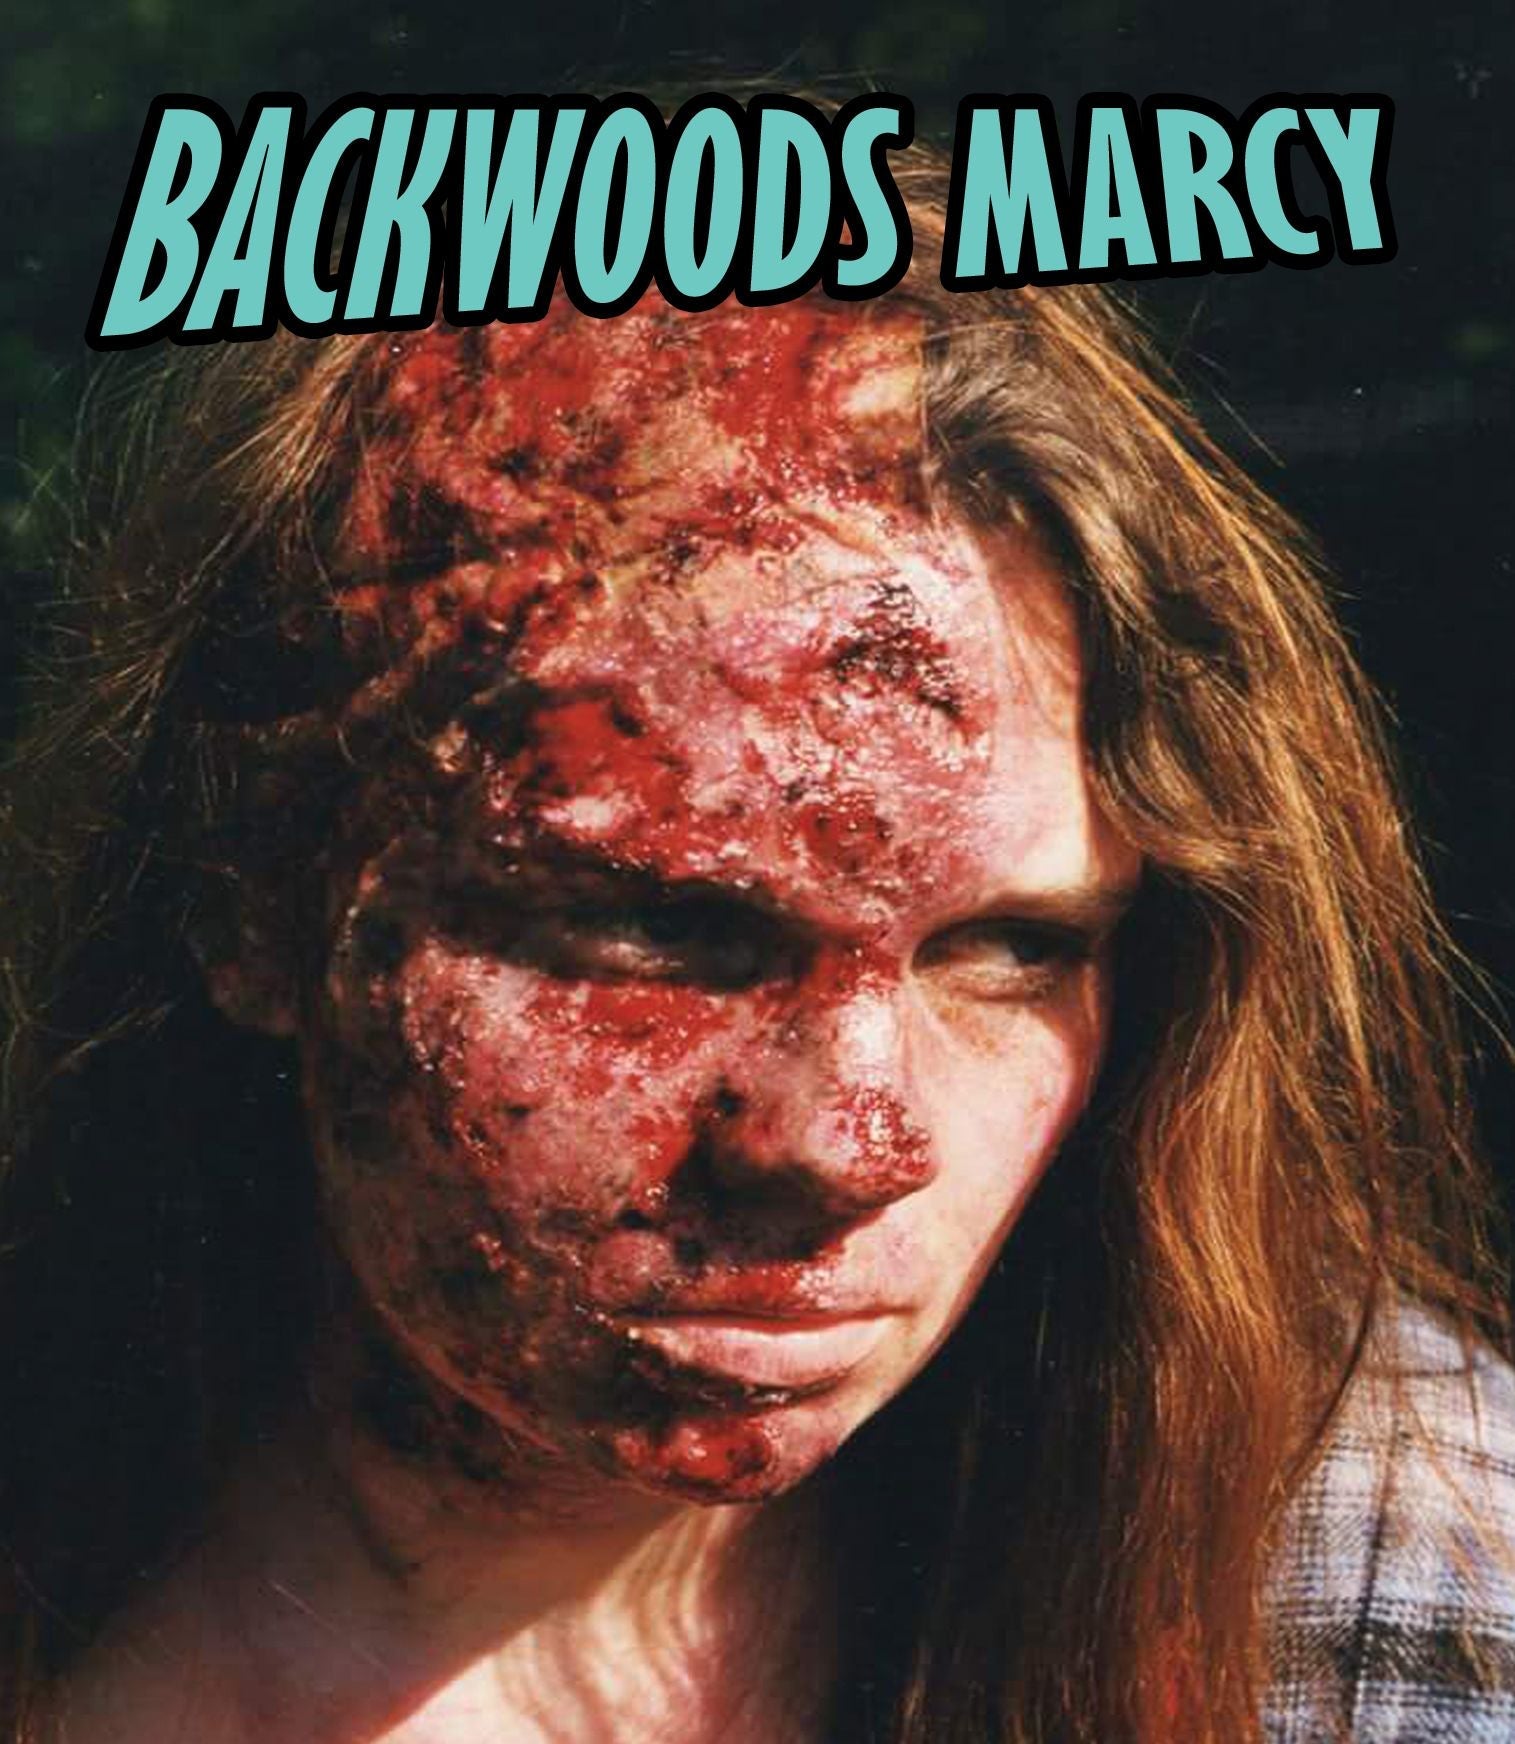 BACKWOODS MARCY (LIMITED EDITION) BLU-RAY